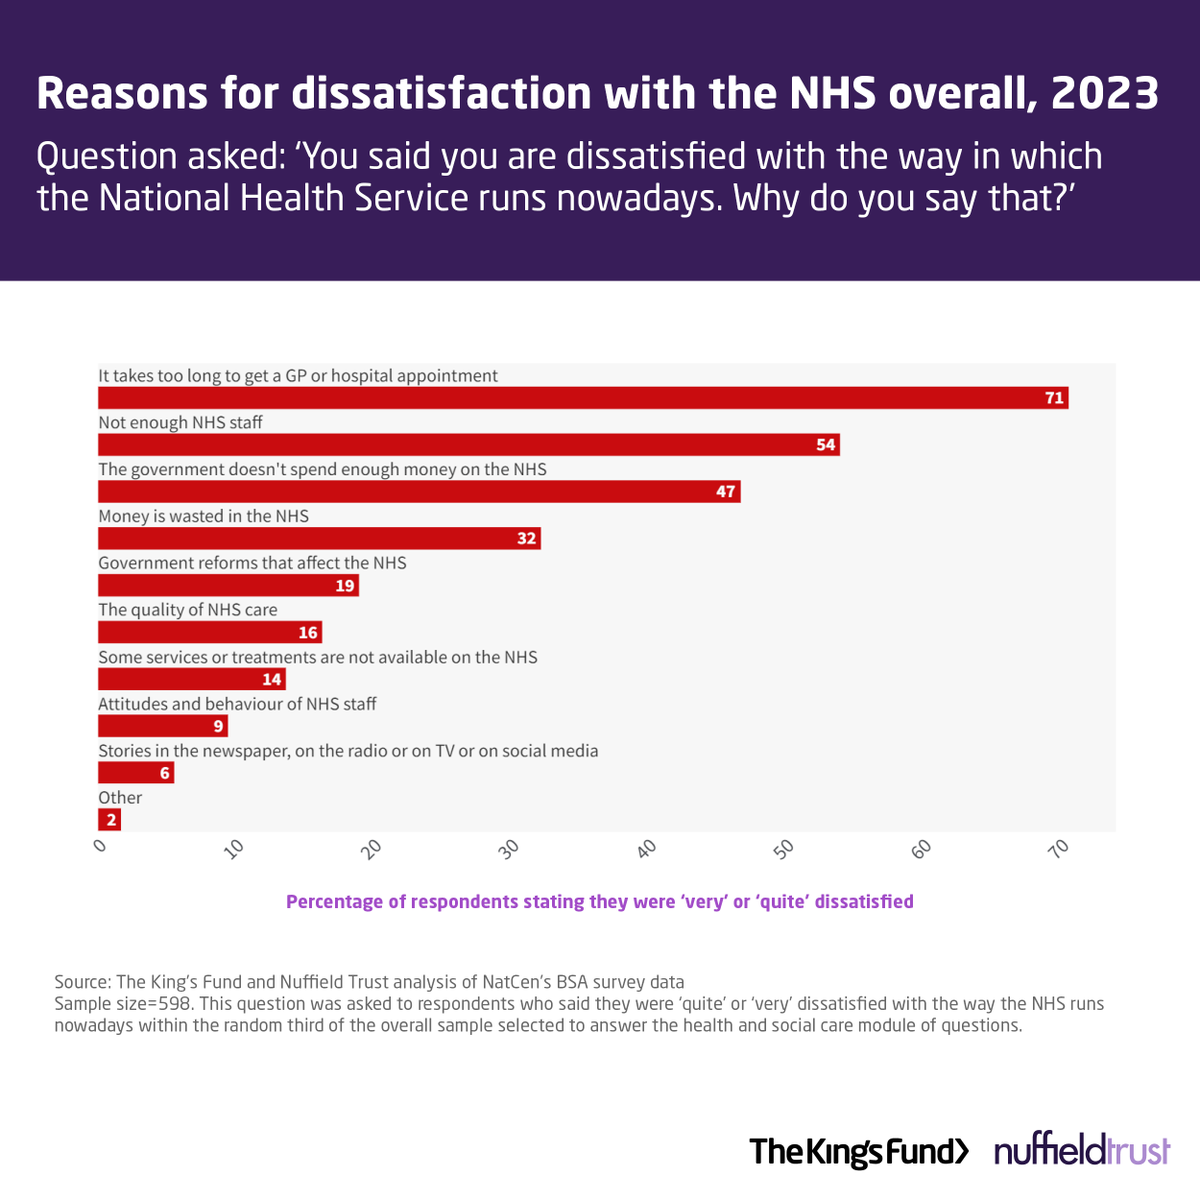 The three top reasons for dissatisfaction with the NHS were waiting times for GP or hospital appointments, staff shortages and #NHS funding. These have been consistent reasons for dissatisfaction since 2015.